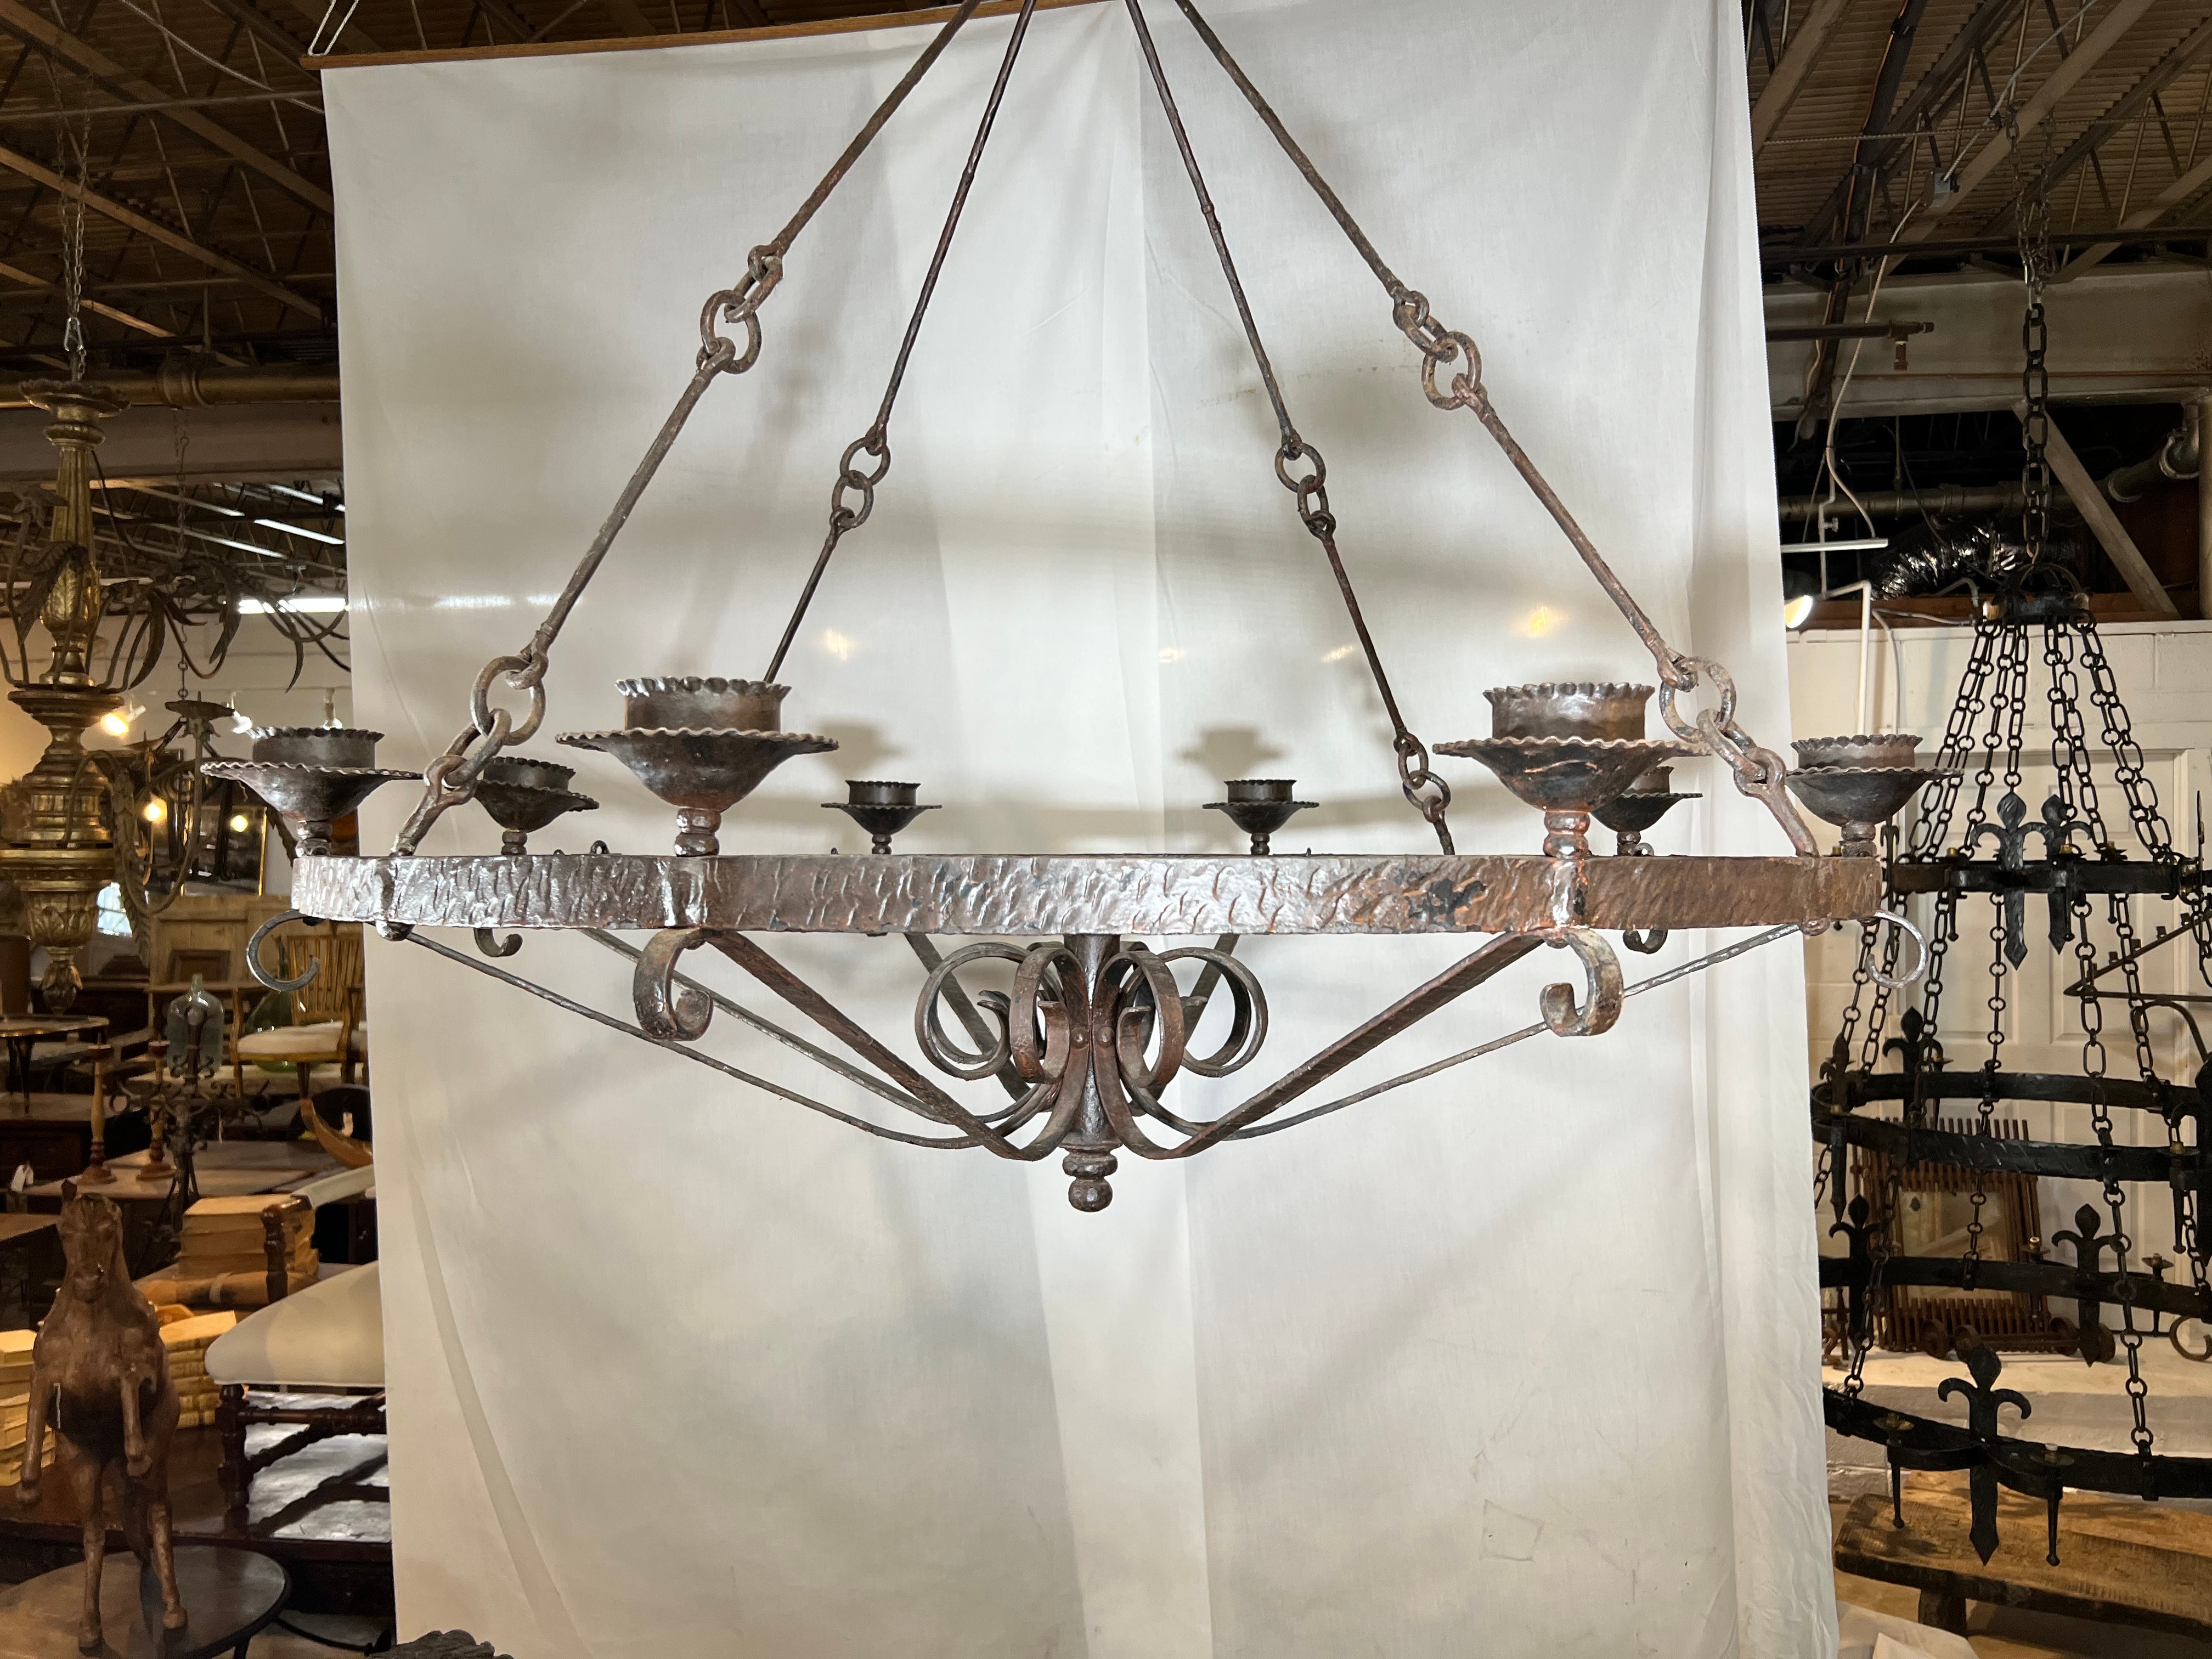 A very handsome early 20th century grand scale Chandelier from the South of France. Expertly crafted from hand forged iron with martele' detailing.